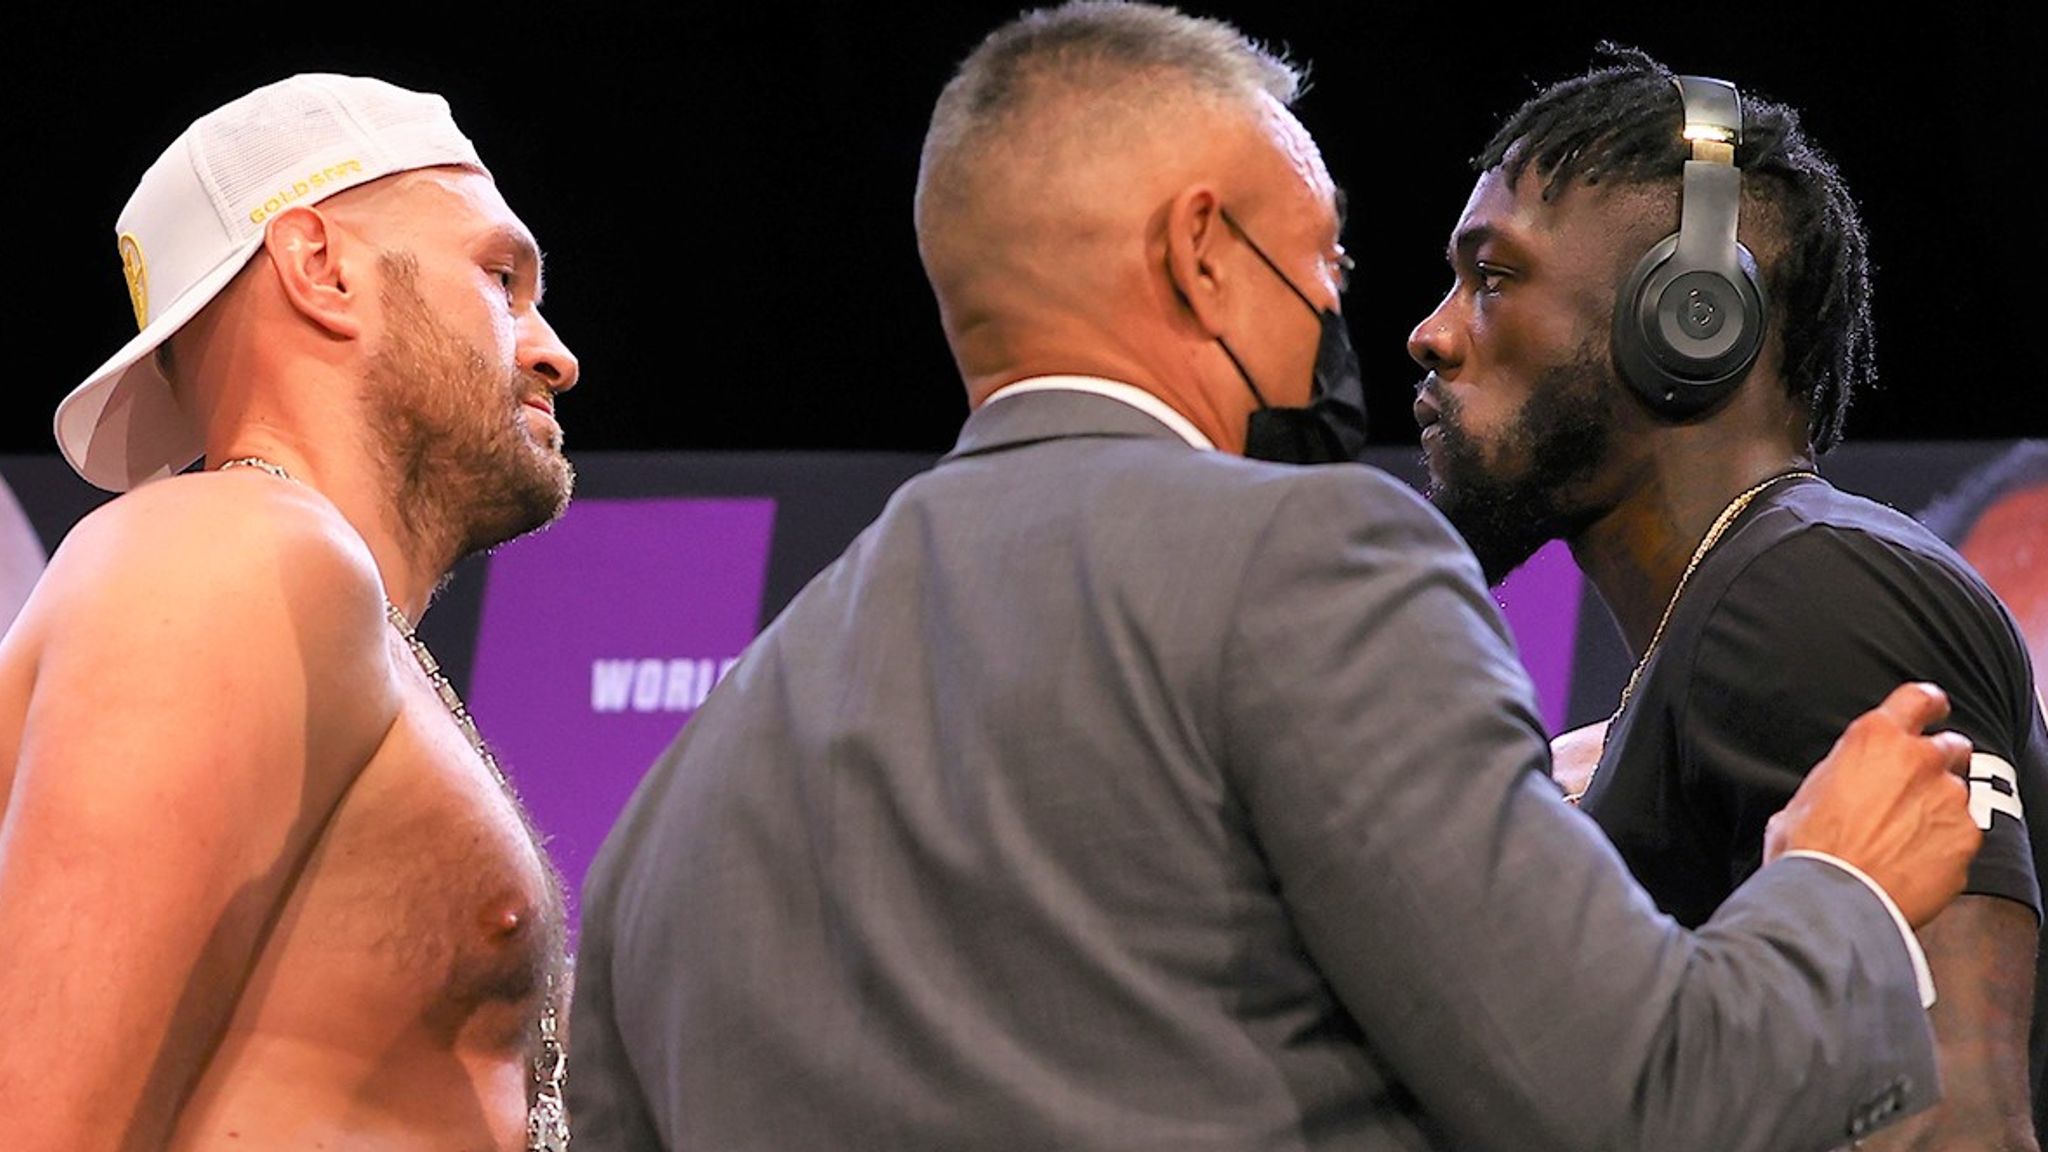 Tyson Fury and Deontay Wilder in tense face-off